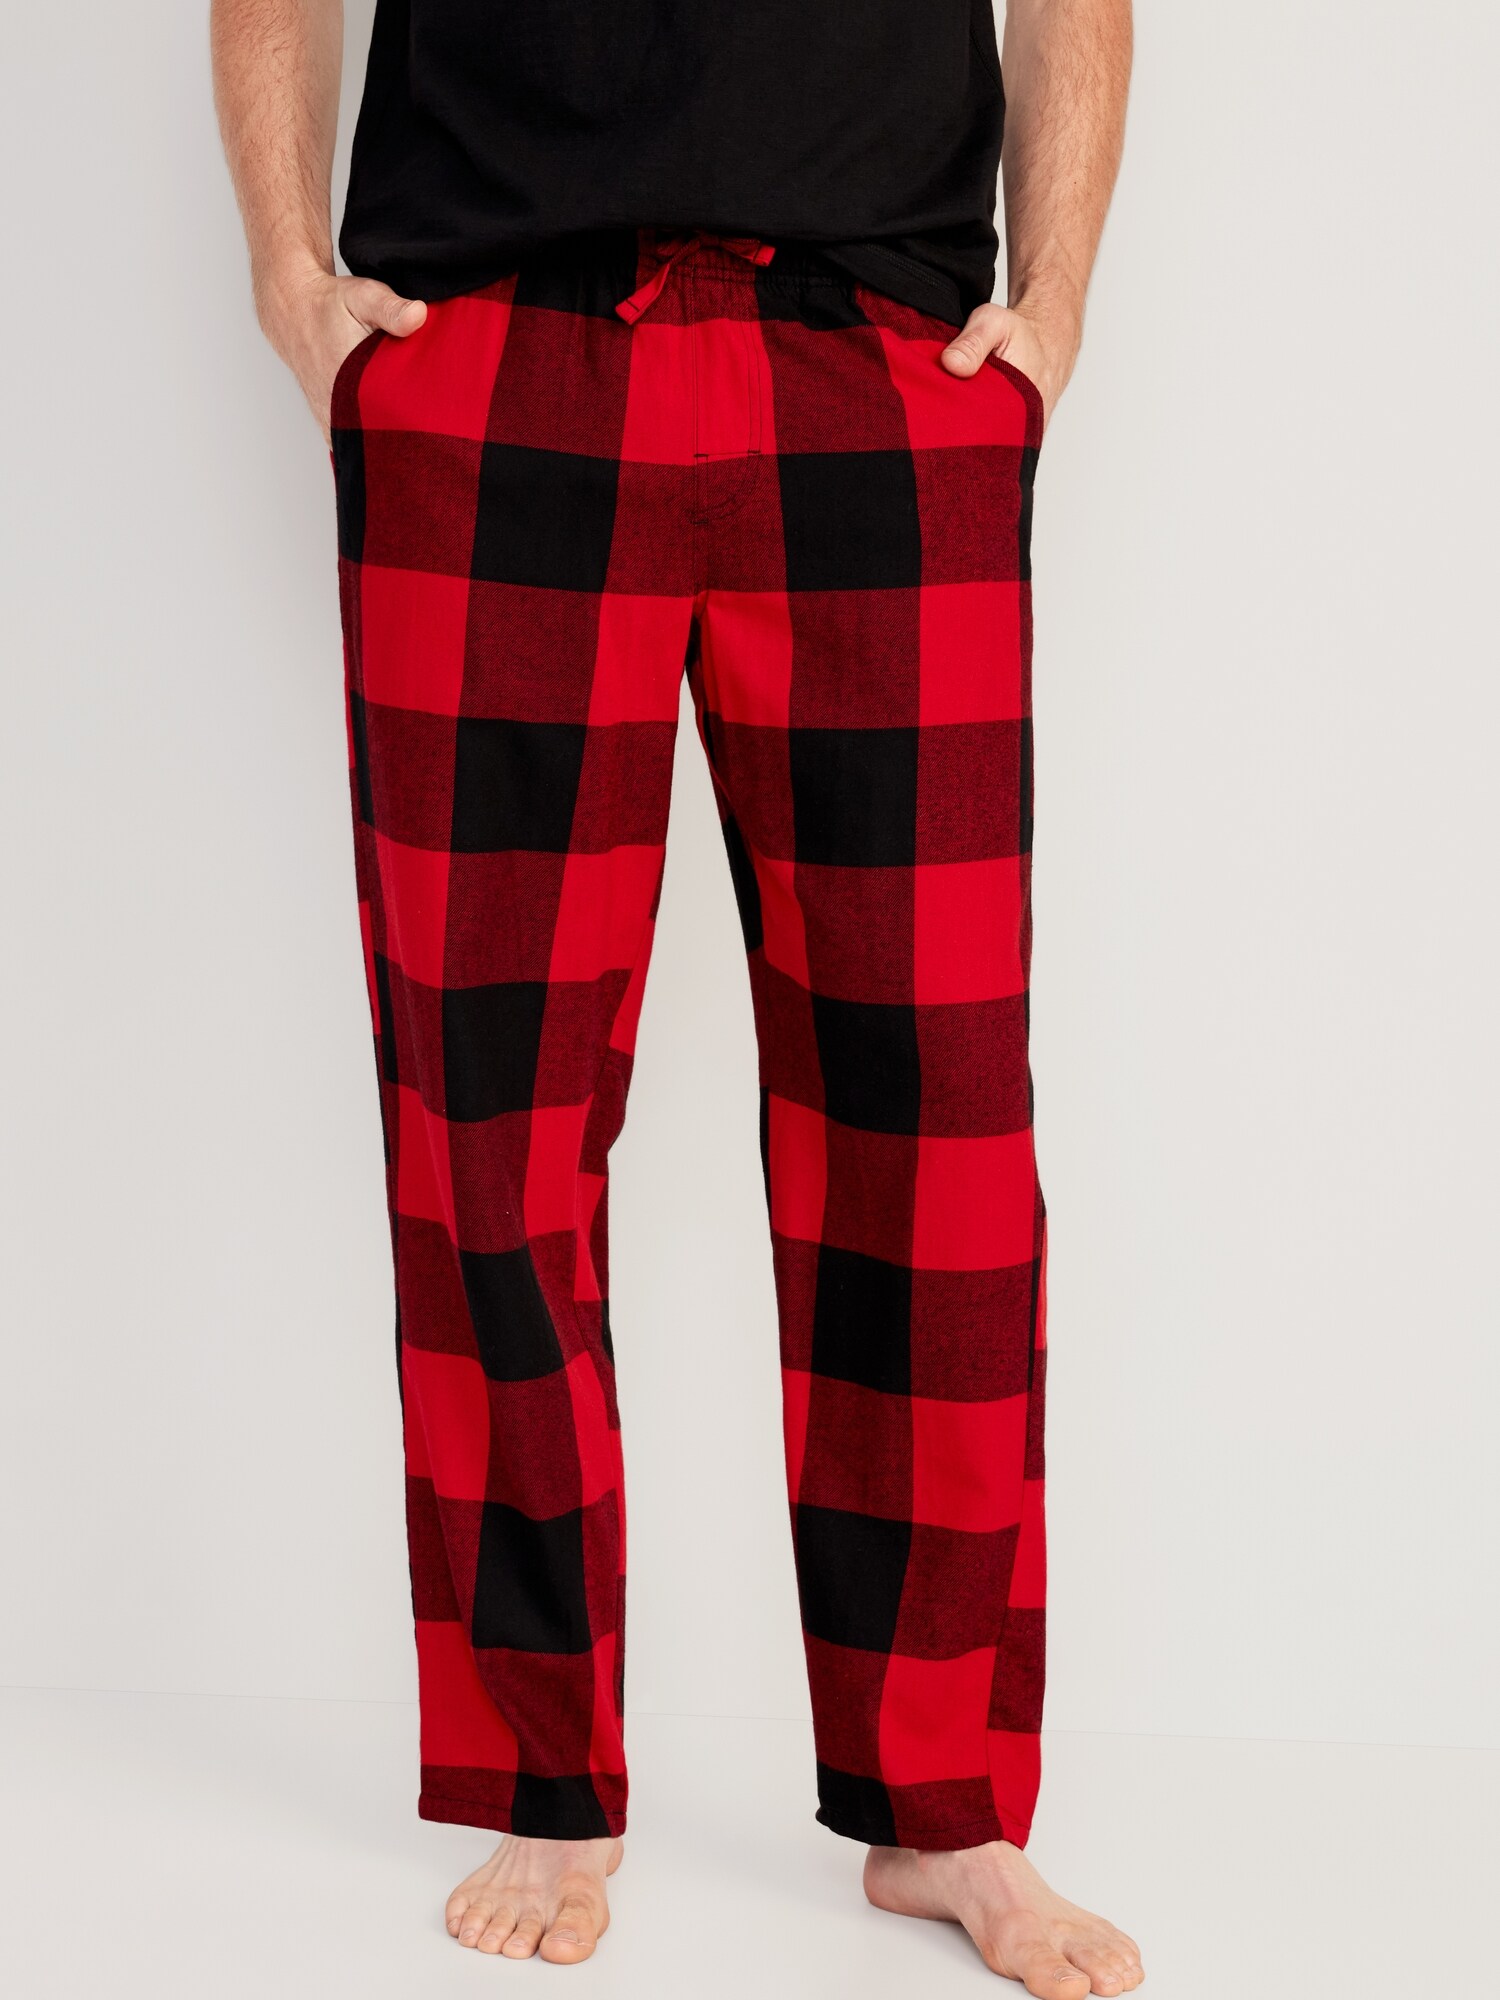 Matching Flannel Pajama Pants 2-Pack | Old Navy